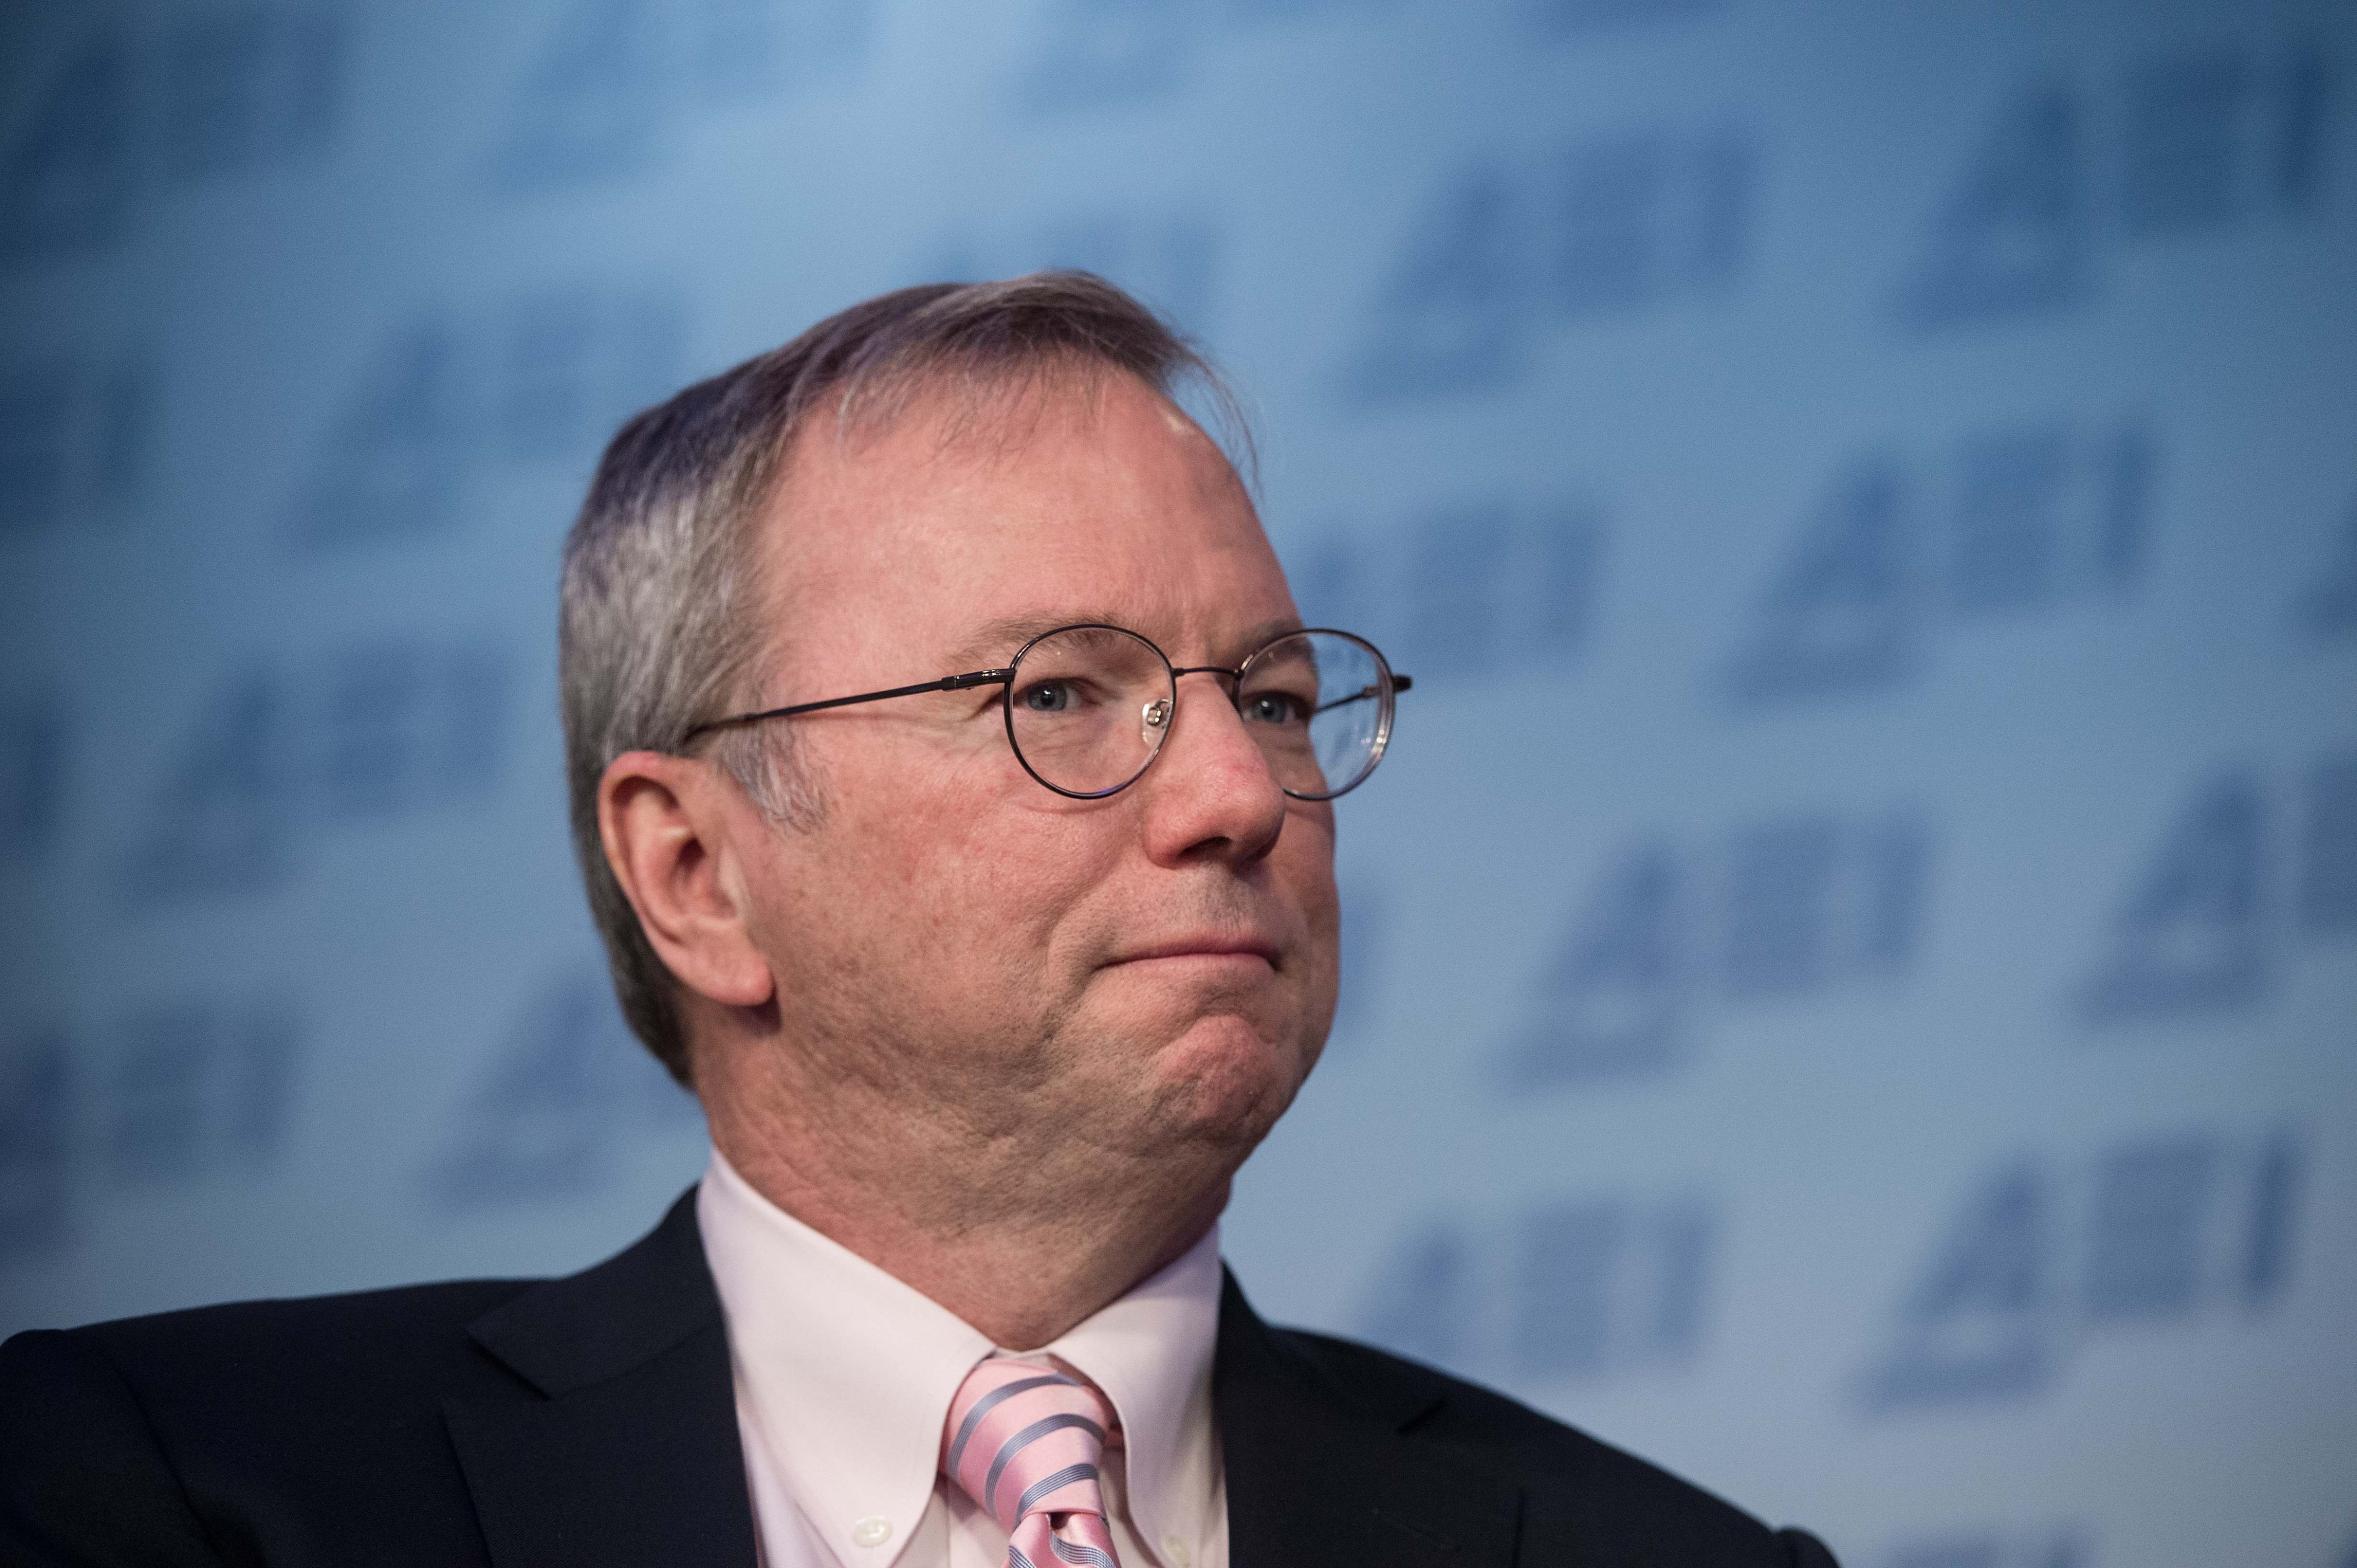 Google executive chairman Eric Schmidt speaks on technology on March 18, 2015 at the American Enterprise Institute in Washington, DC.